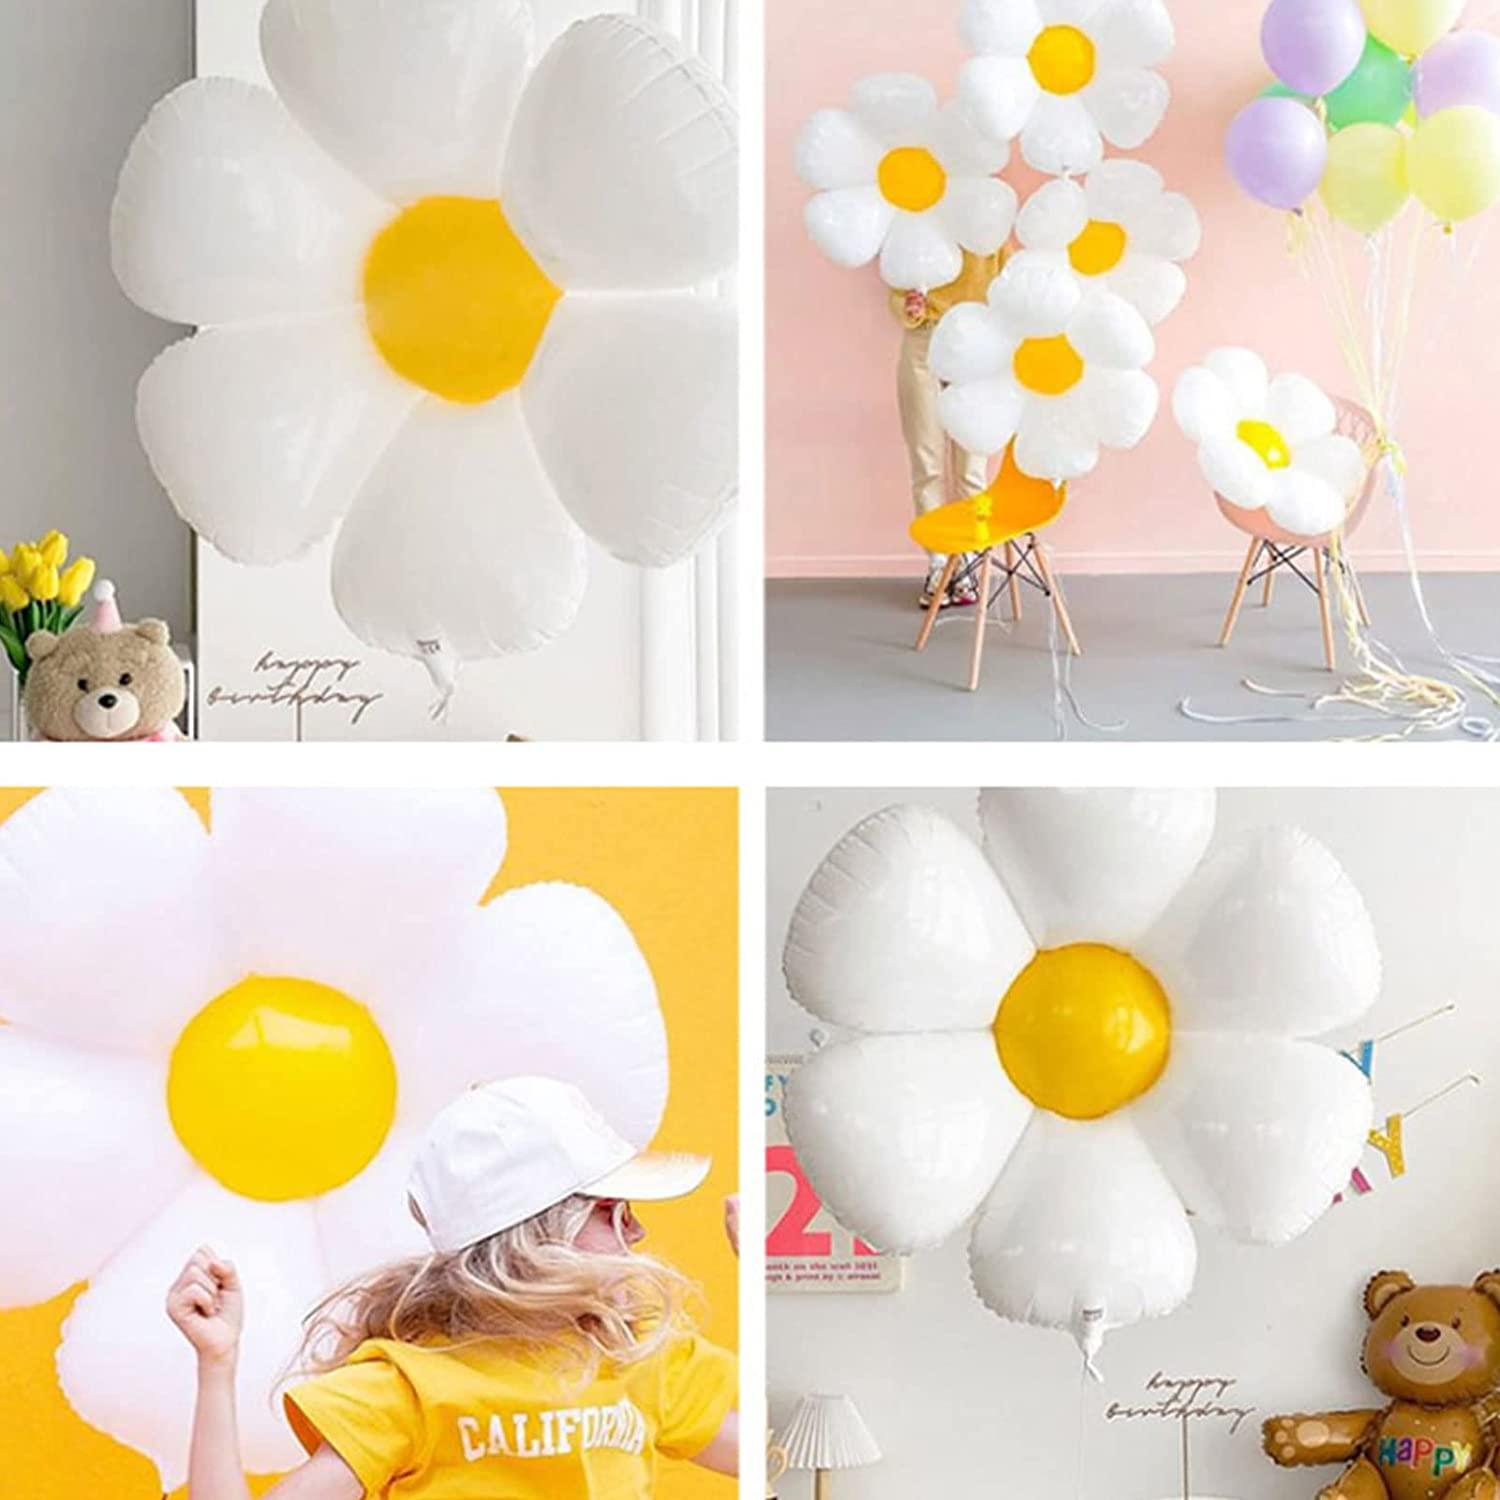 10 Pcs Daisy Balloons, Huge White Flower Aluminum Foil Balloons for Birthday, Baby Shower, Wedding, Daisy Party Decorations Supplies - If you say i do